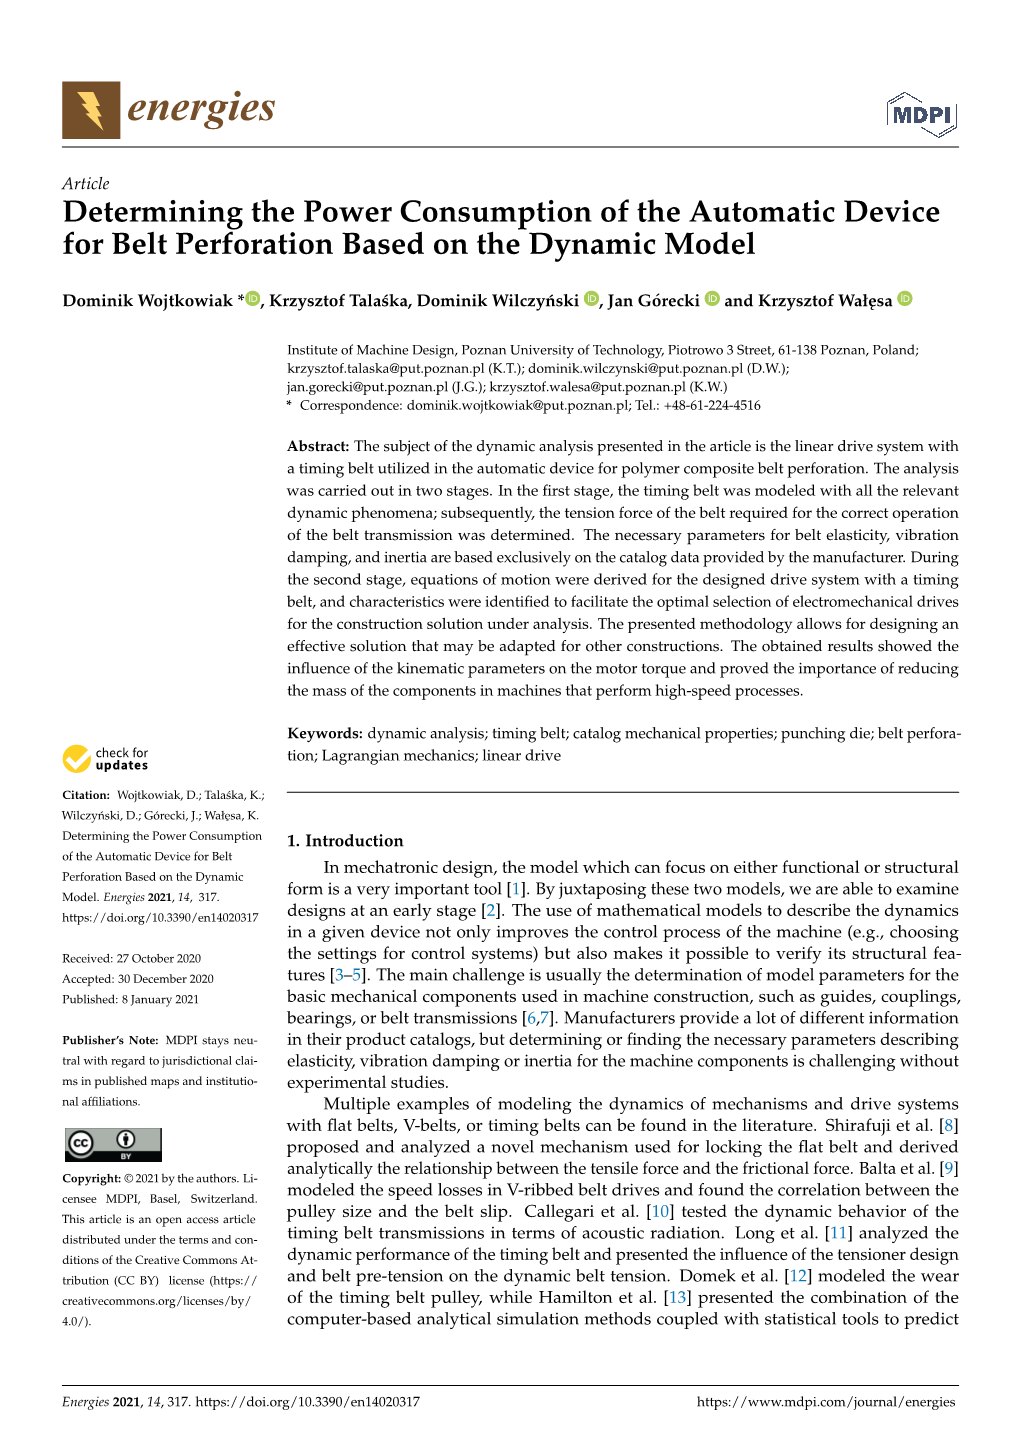 Determining the Power Consumption of the Automatic Device for Belt Perforation Based on the Dynamic Model